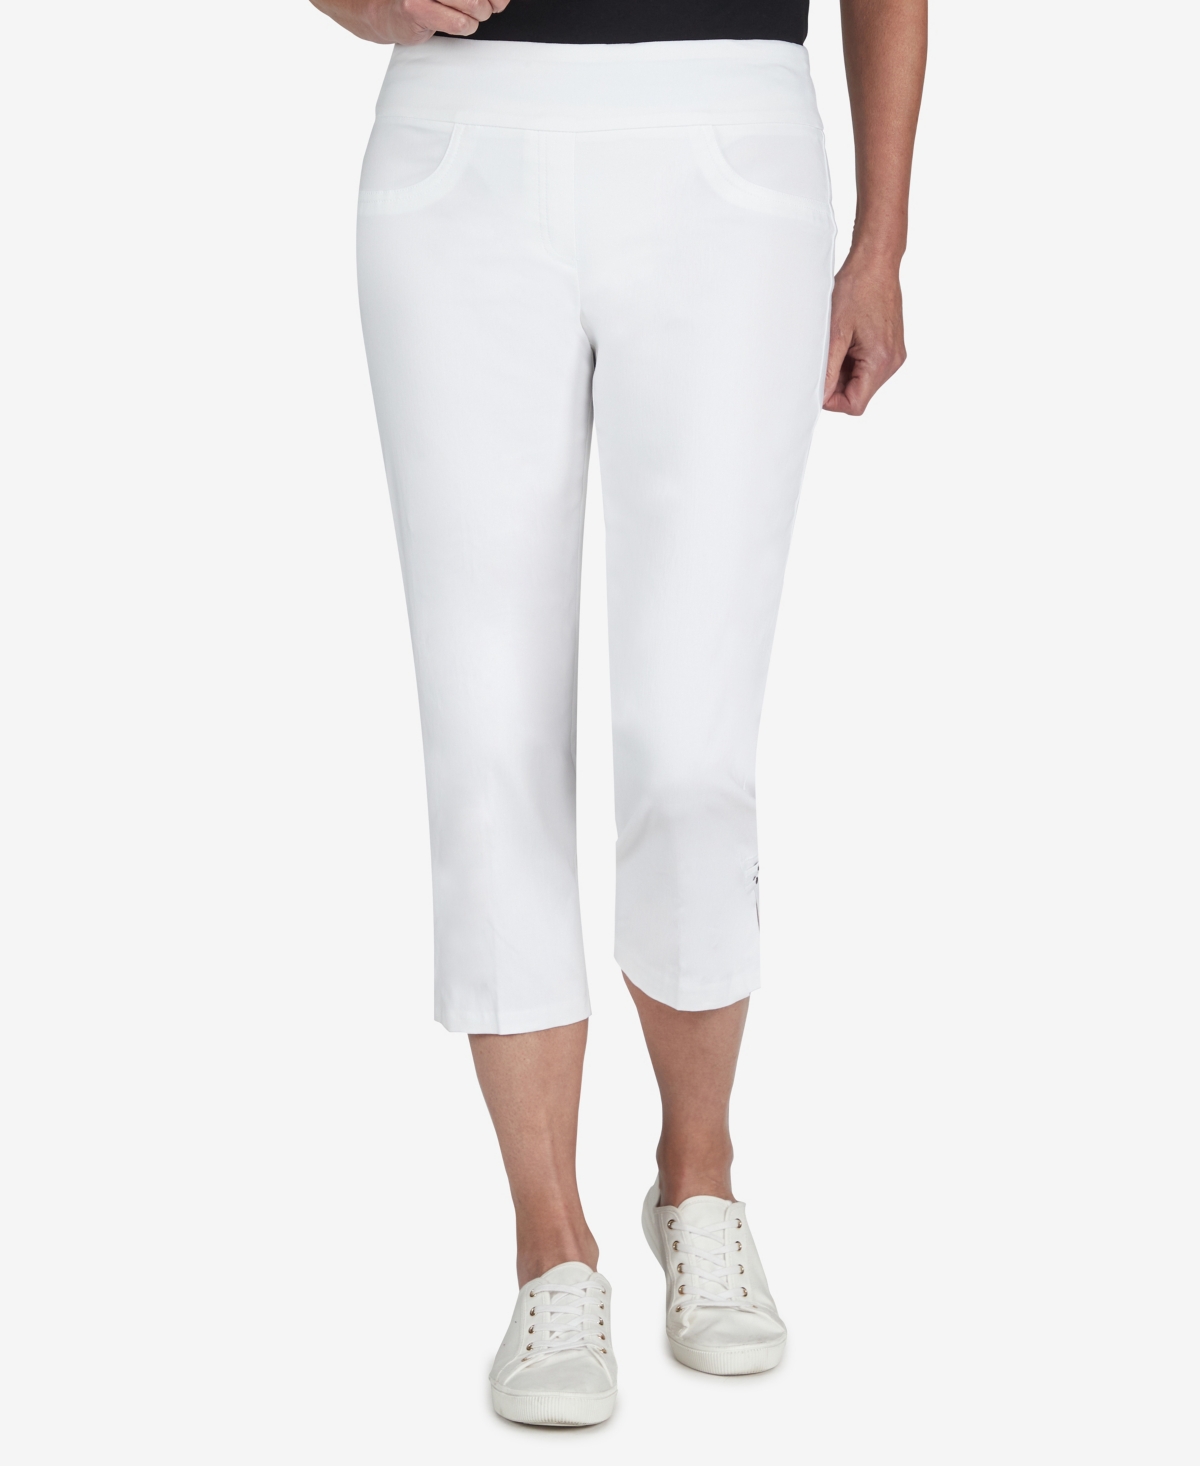 Plus Size Essentials Solid Pull-On Capri Pants with Detailed Split Hem - White